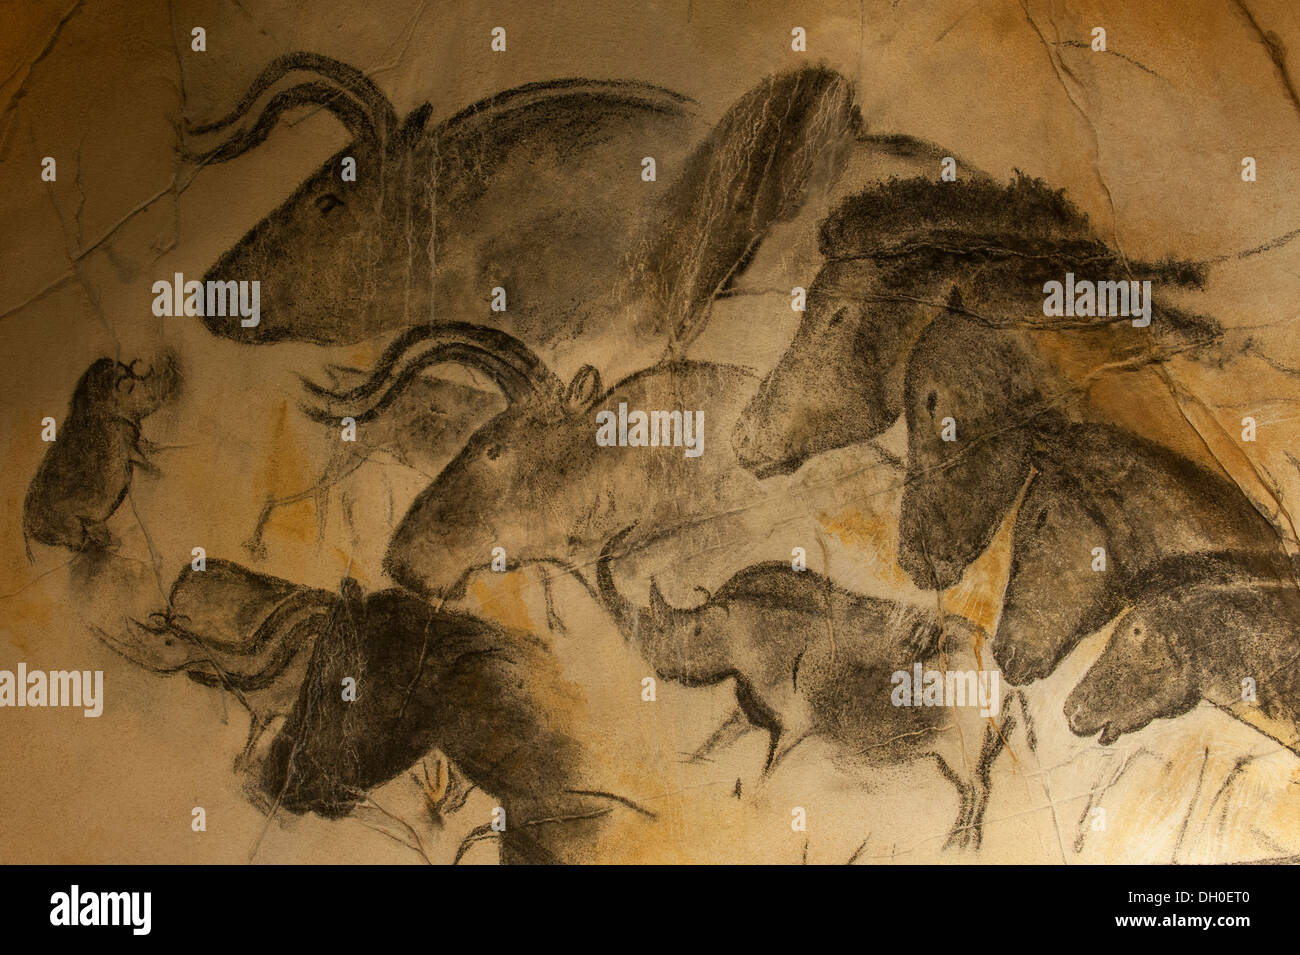 Replica of prehistoric rock paintings of  woolly rhinoceros and aurochs, Chauvet Cave / Chauvet-Pont-d'Arc Cave, Ardèche, France Stock Photo